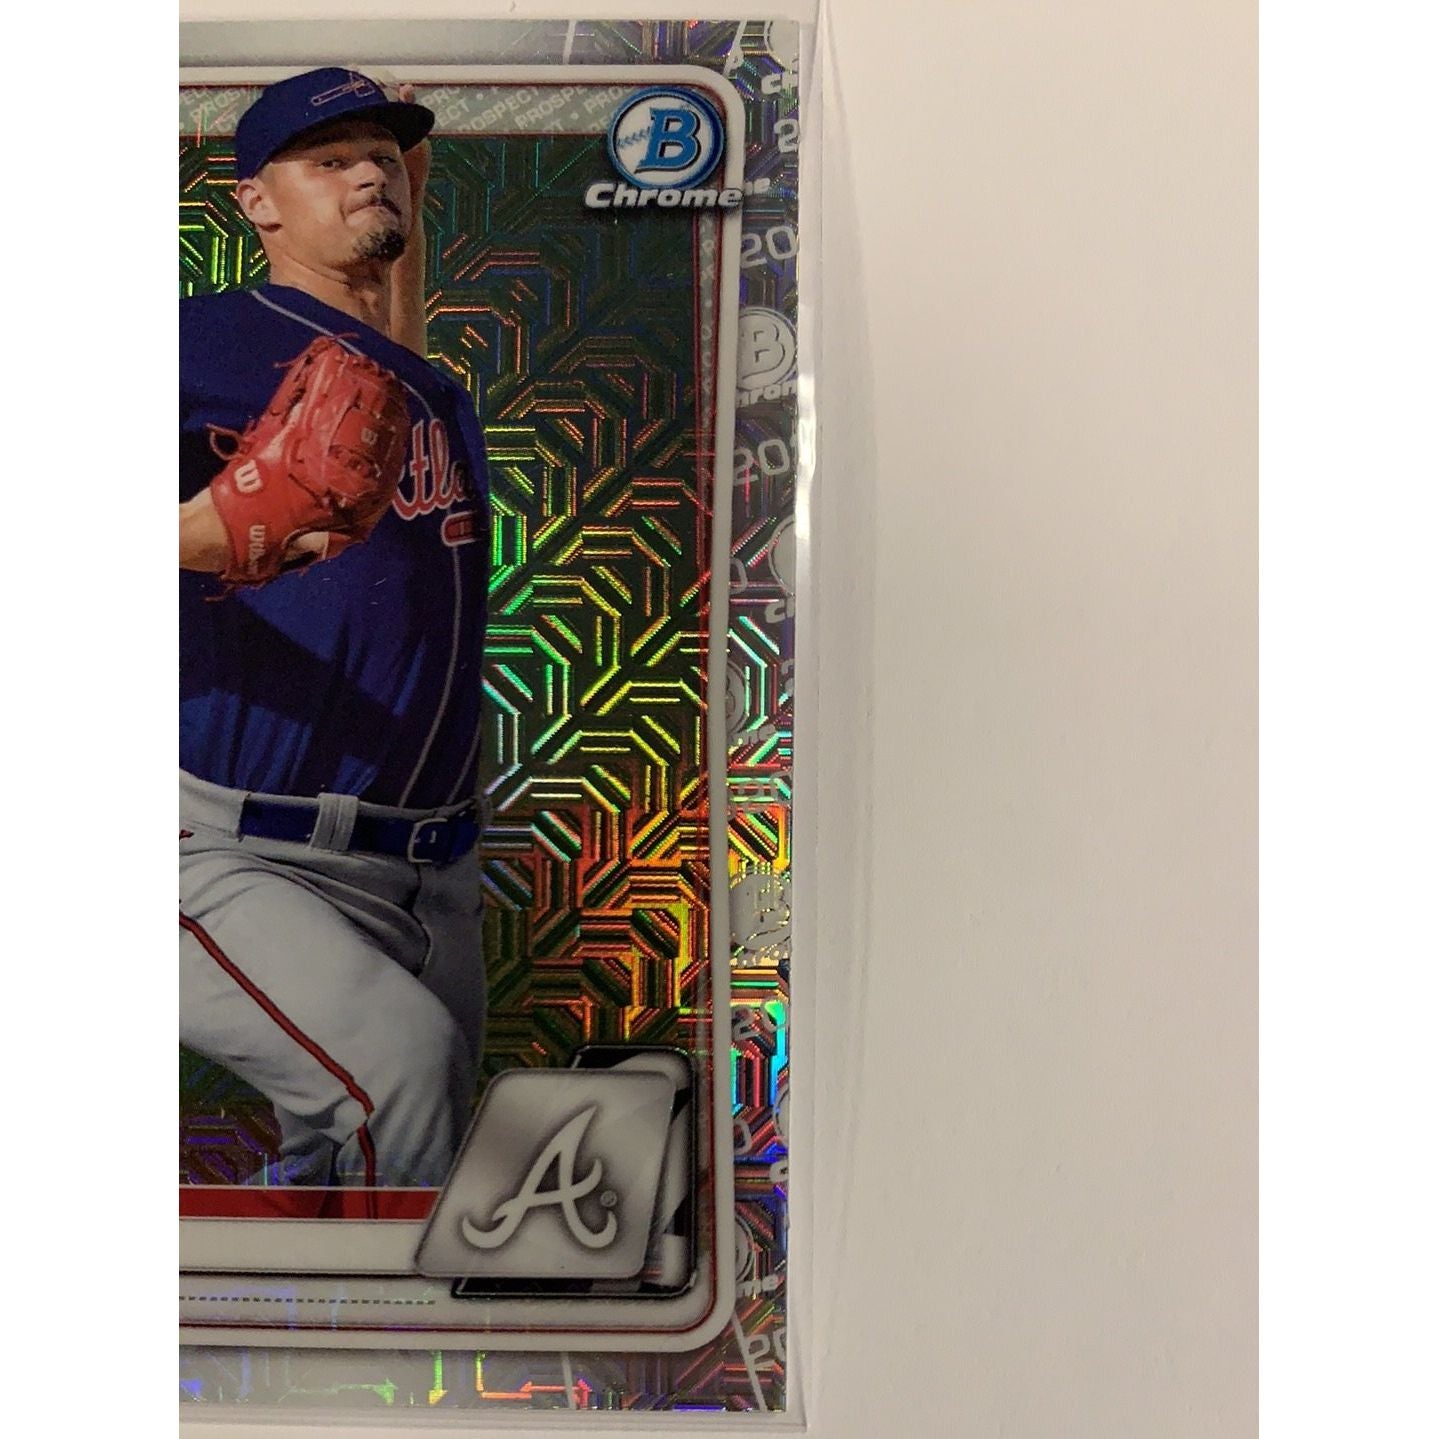  2020 Bowman Chrome Kyle Muller Prospect Mojo Refractor  Local Legends Cards & Collectibles